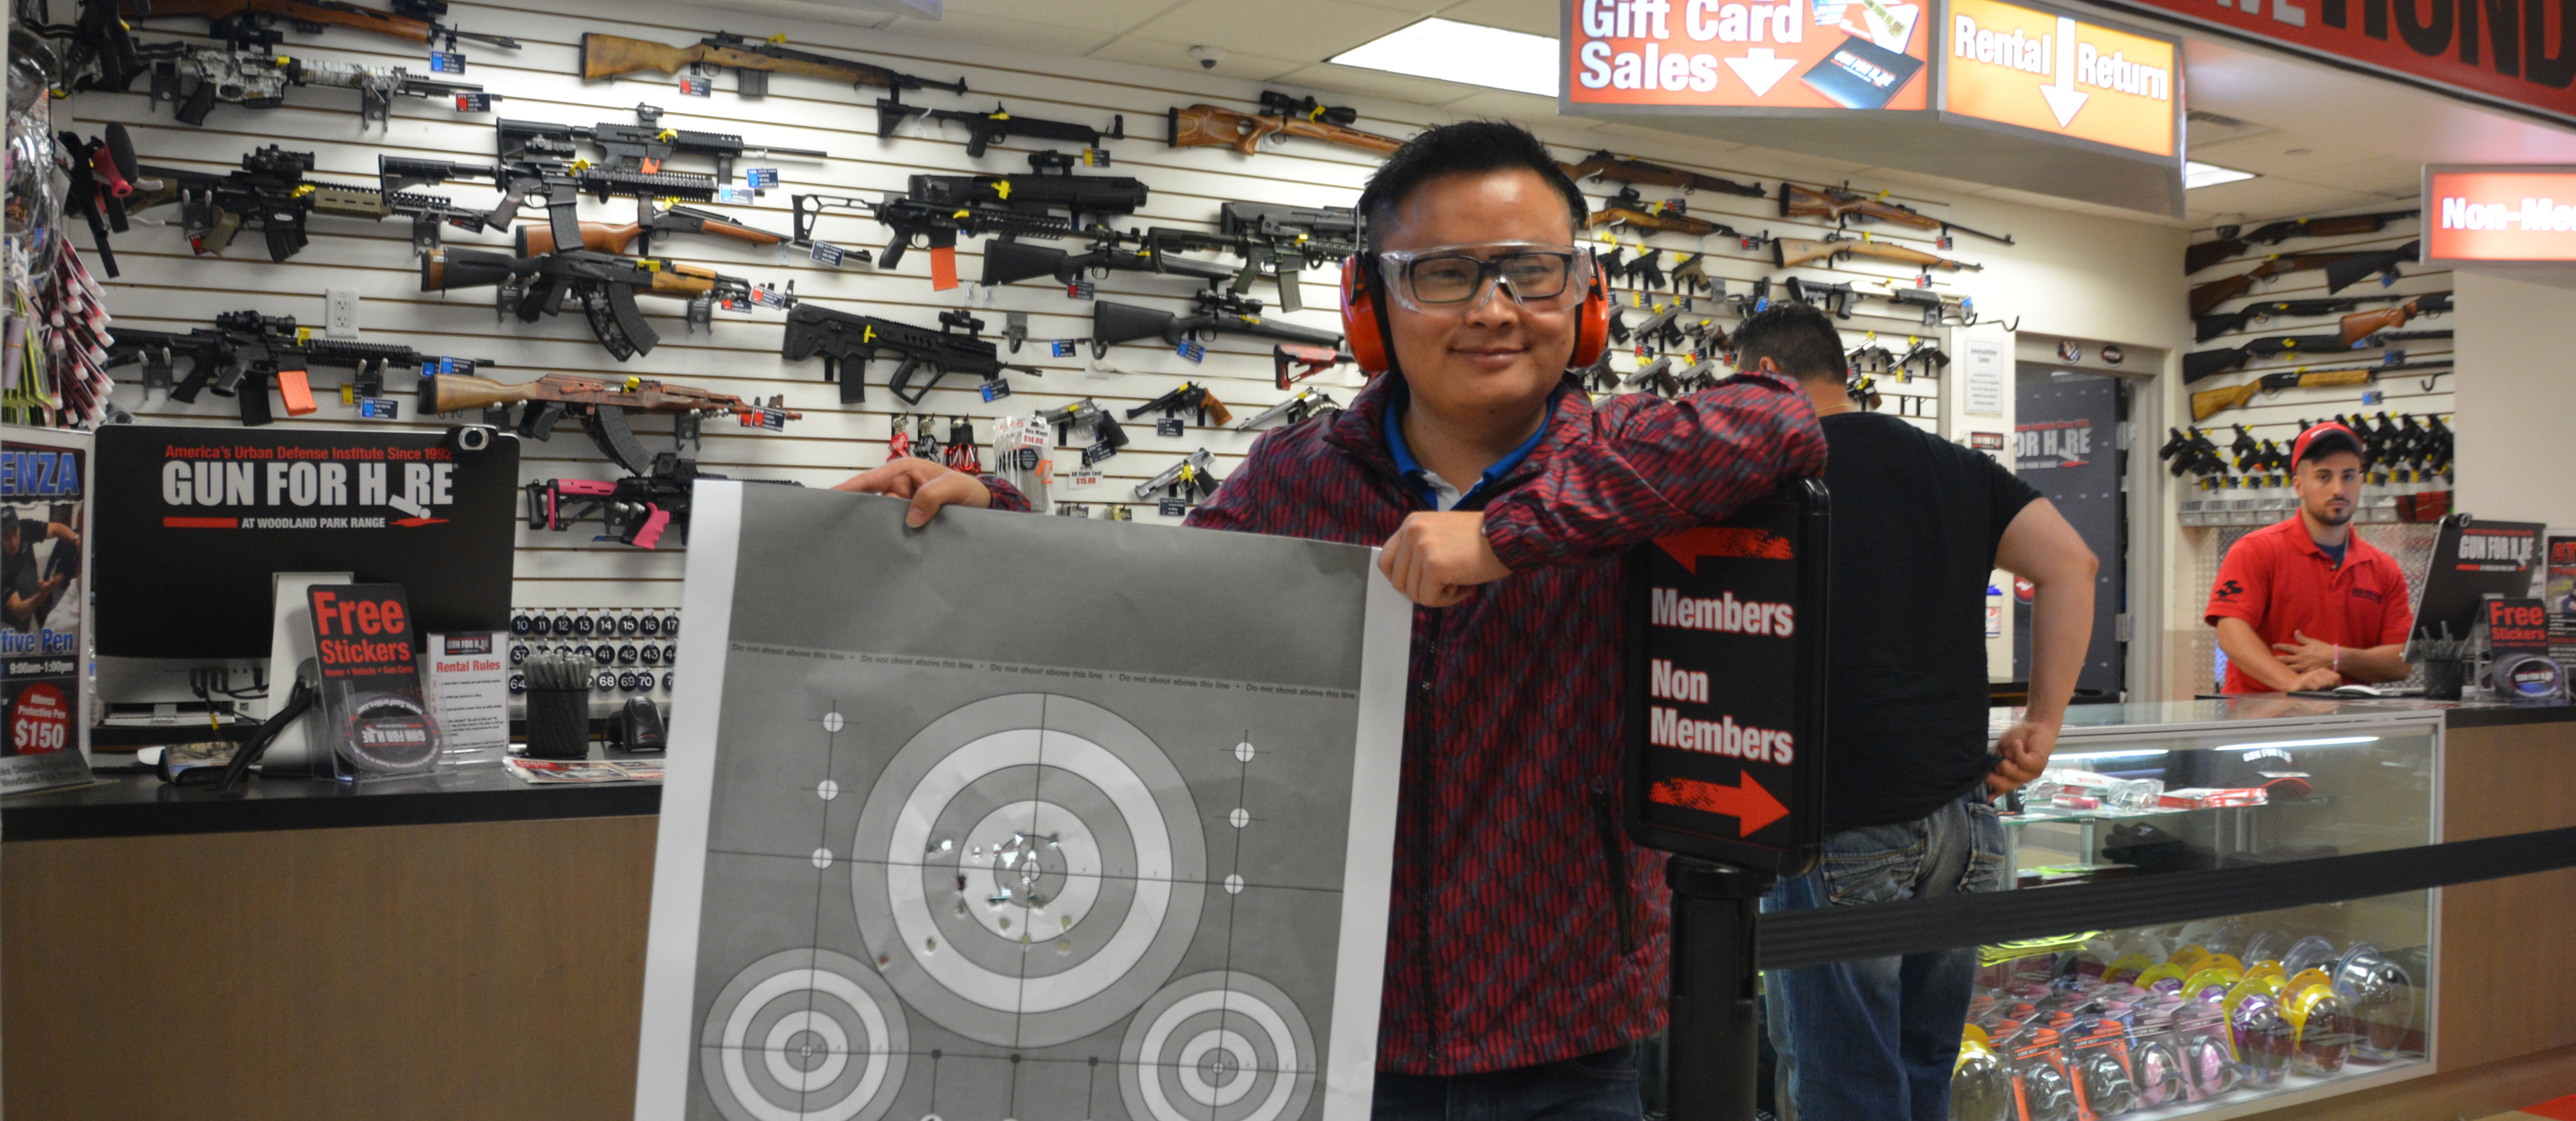 Chinese shooting 3 - Gun For Hire welcomes the United Kingdom community to the gun range